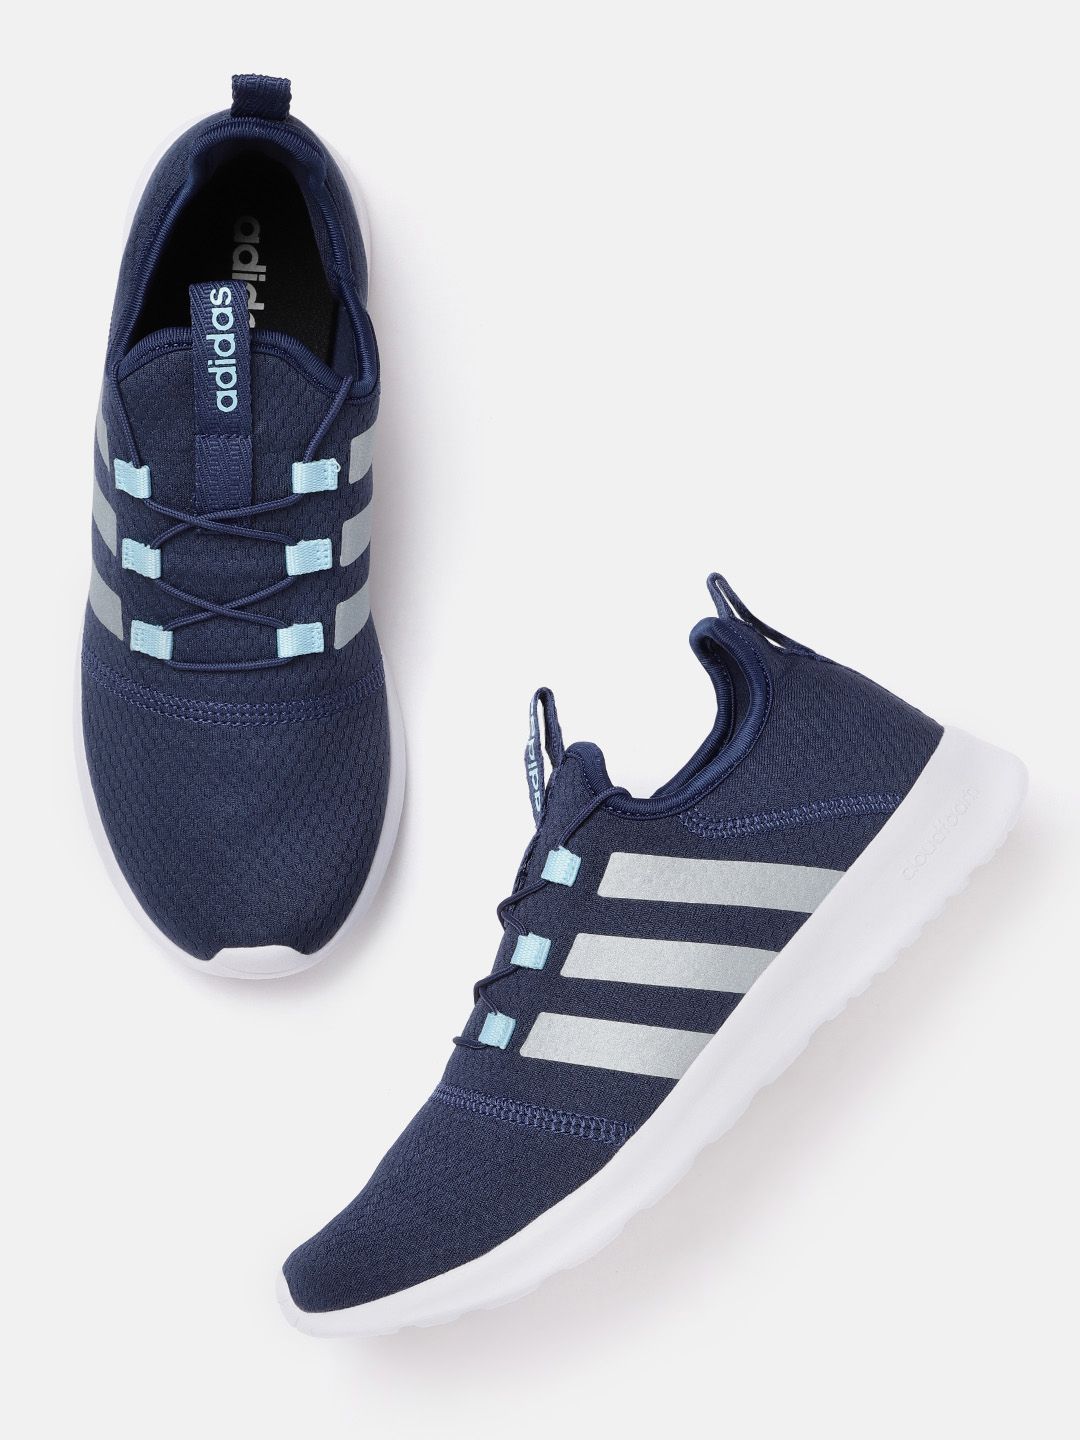 ADIDAS Women Navy Blue Woven Design Aestheto Running Shoes Price in India